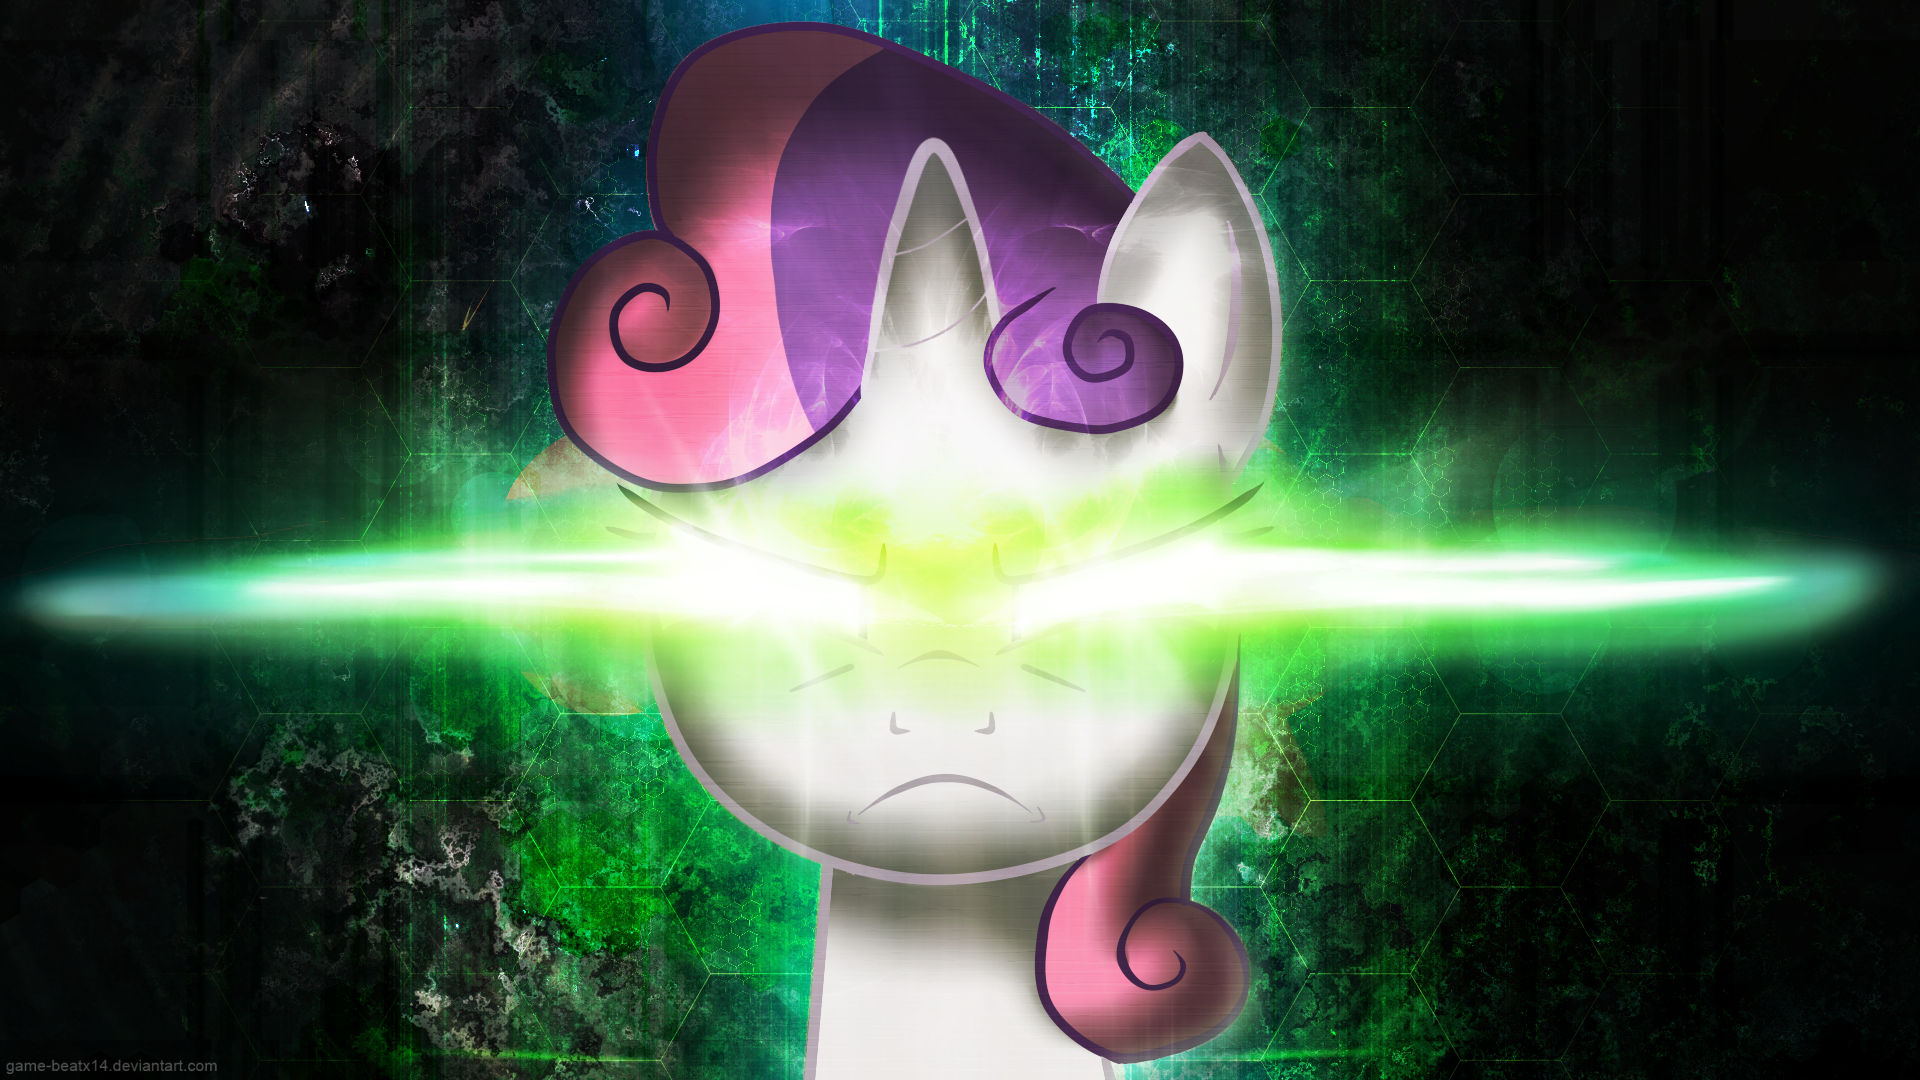 Ultimate Sweetie Belle by Dotorrii and Game-BeatX14